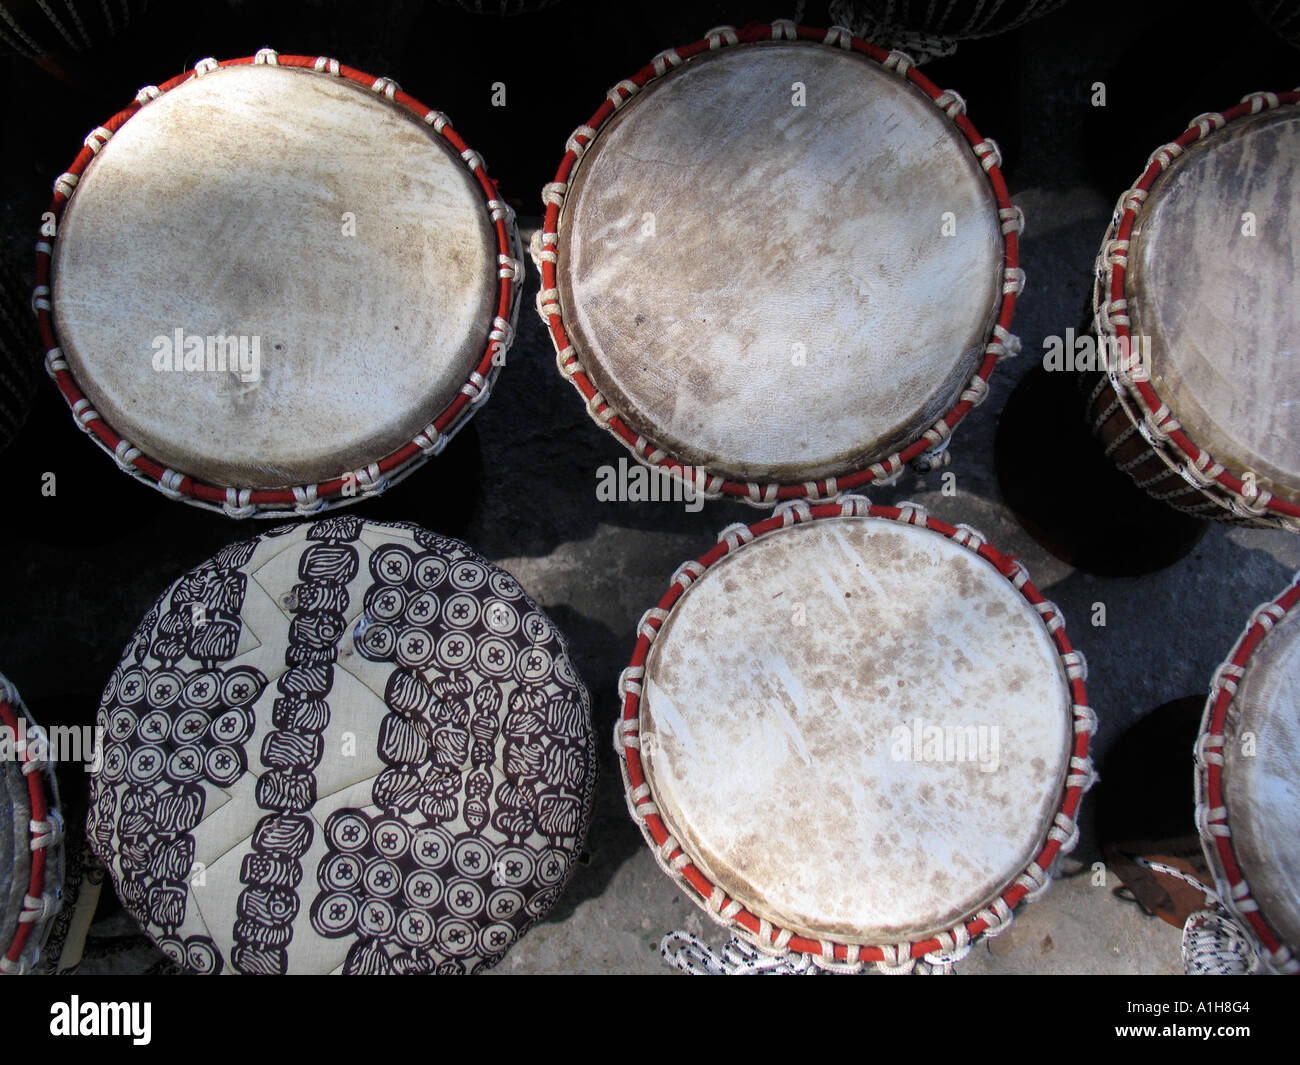 African drums Bakau The Gambia Stock Photo